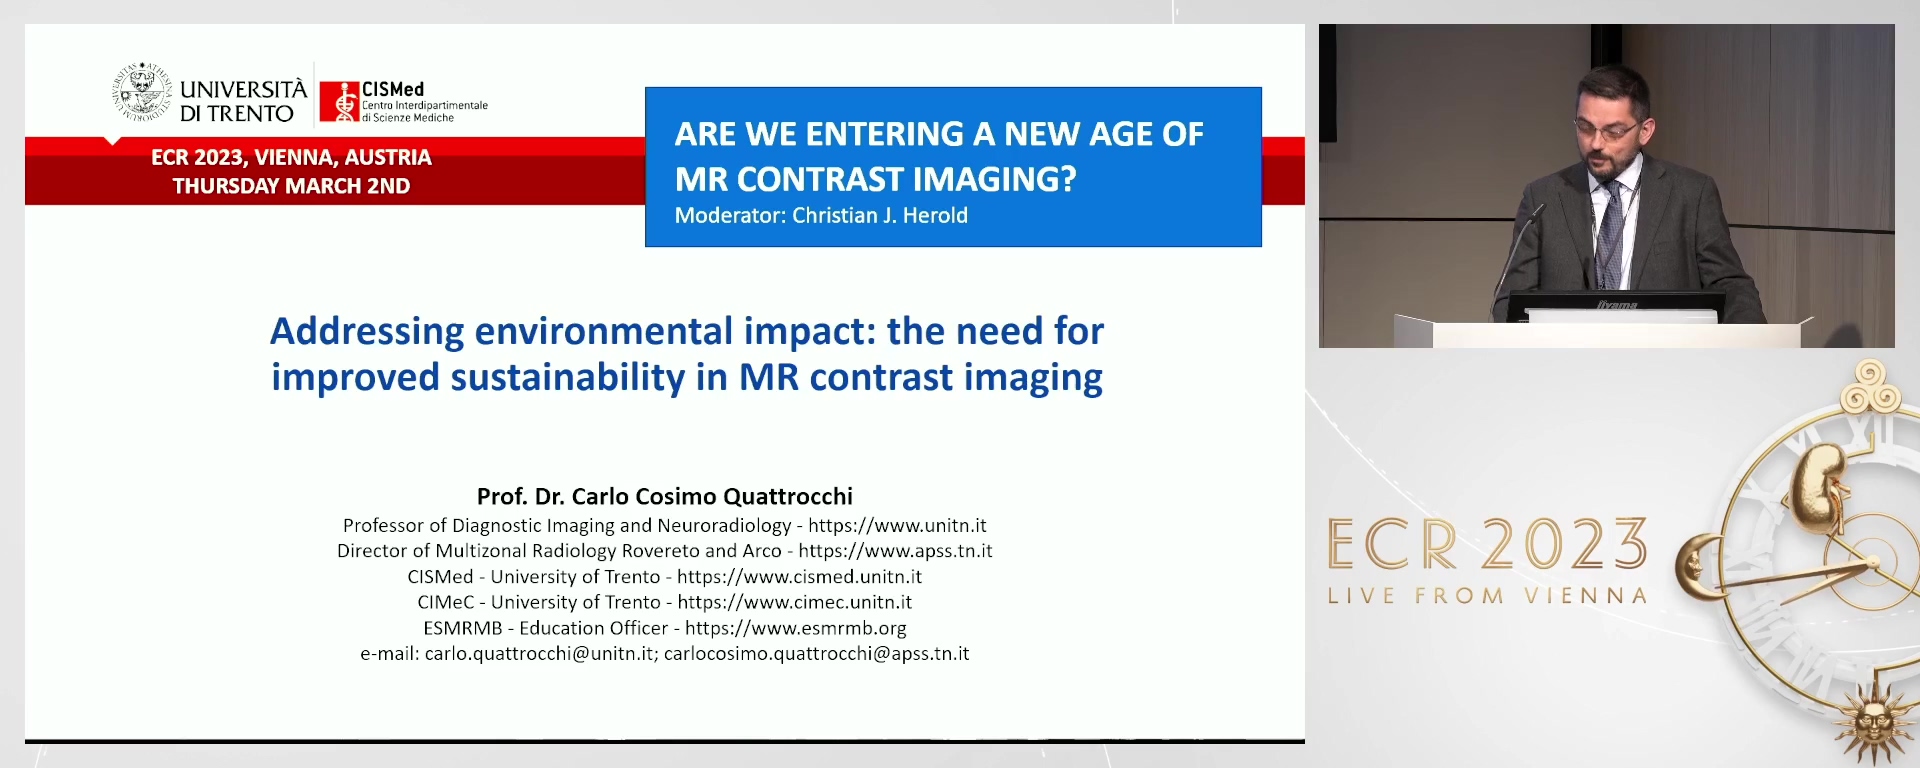 Addressing environmental impact: the need for improved sustainability in MR contrast imaging.